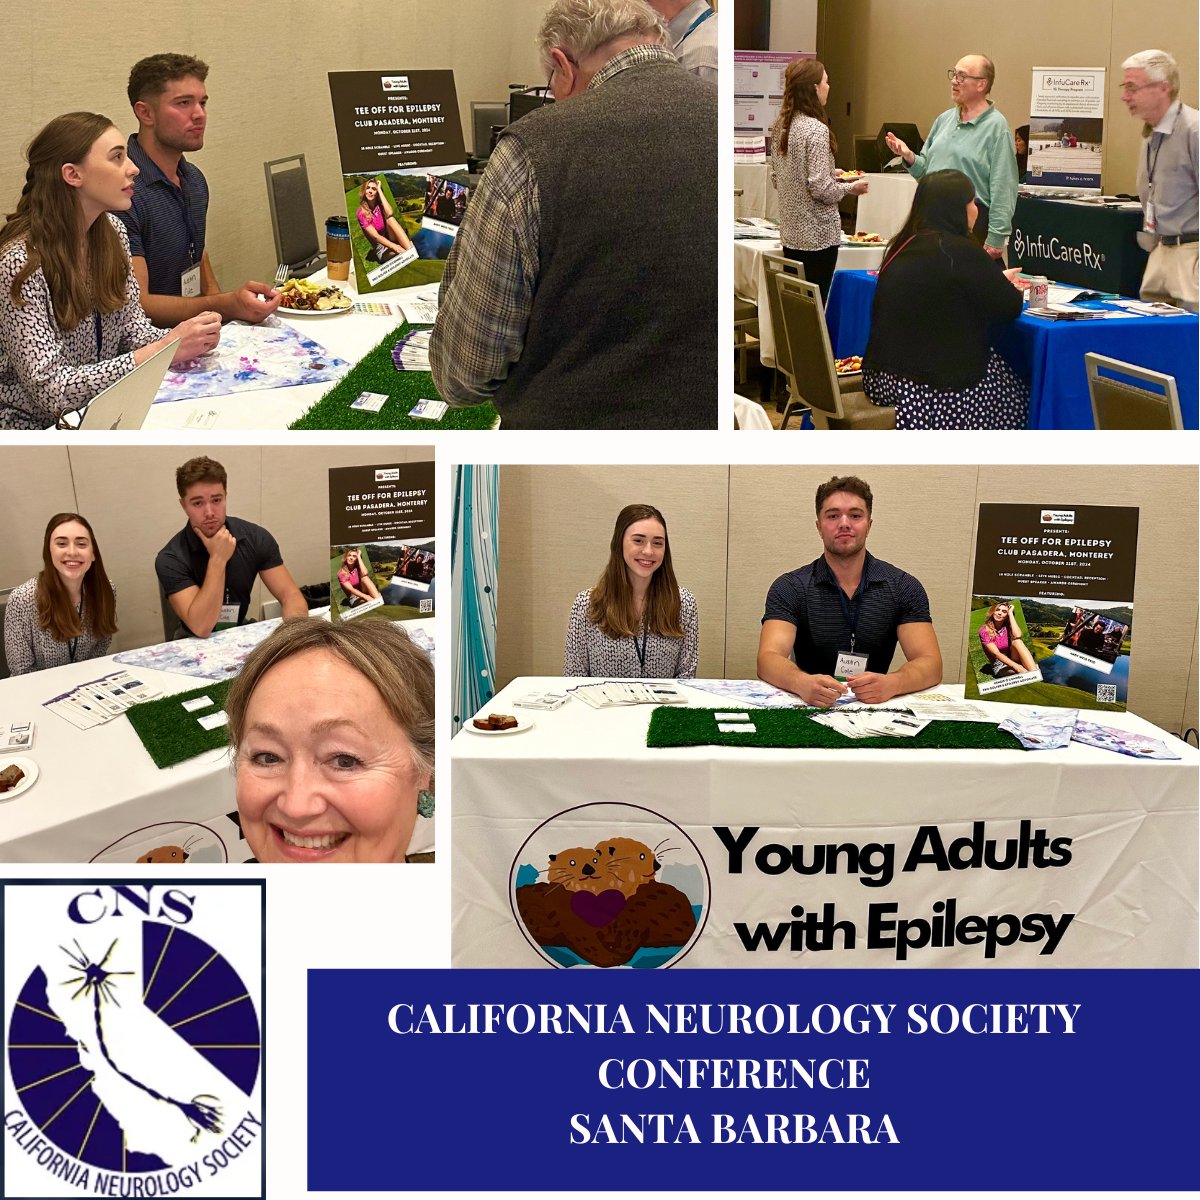 So proud of our Young Adults Team presenting at the California Neurology Society Conference in Santa Barbara. It was a great opportunity to share the young adult take on living with epilepsy with the Neurology community #gratitude #epilepsy #patientvoice